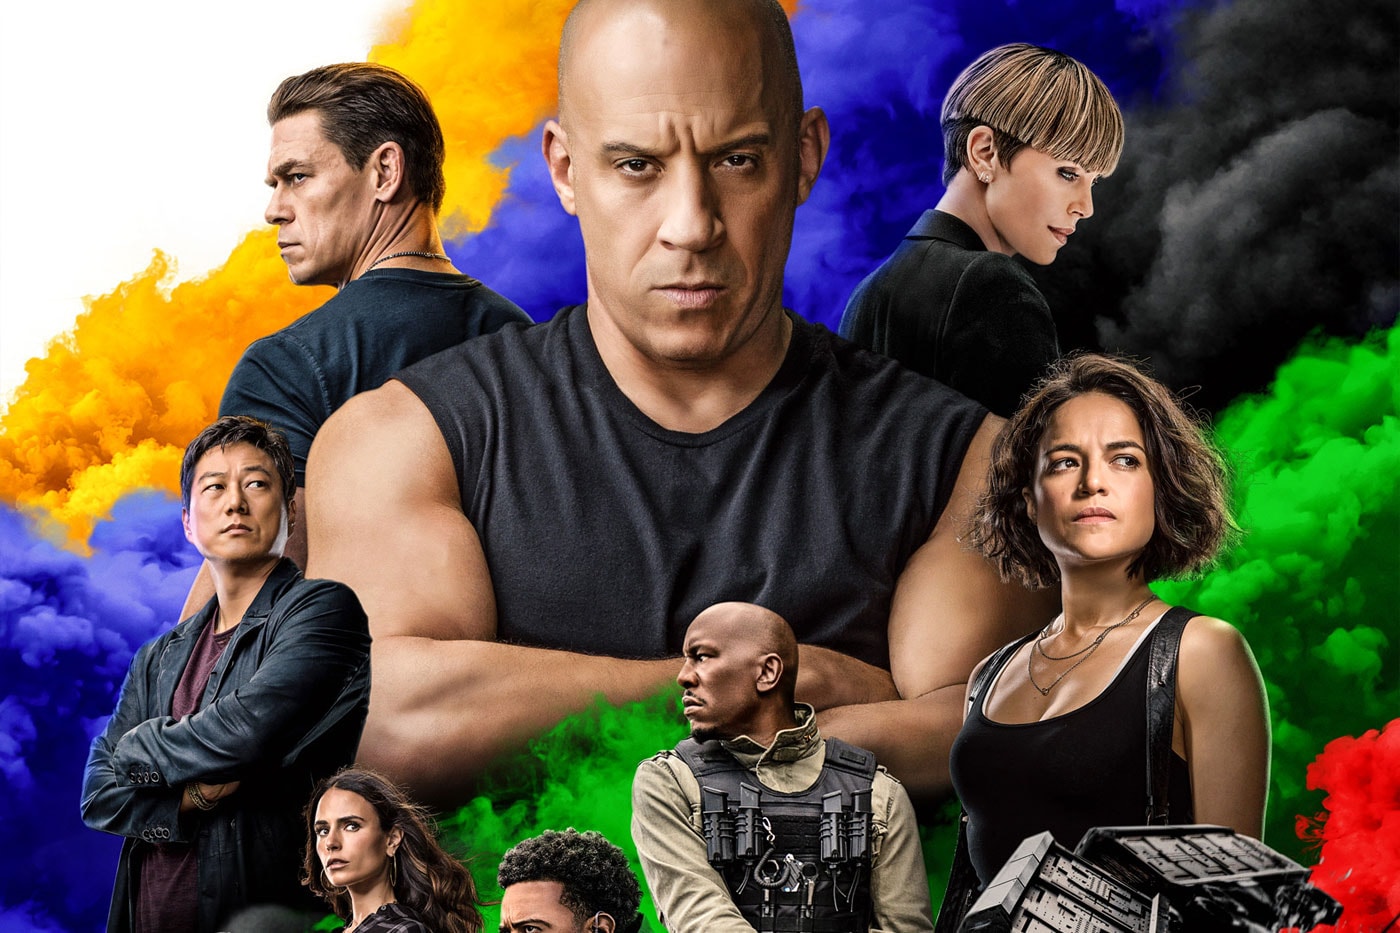 Fast & Furious 10 Cast & Characters: 23 Main Actors and Who They Play